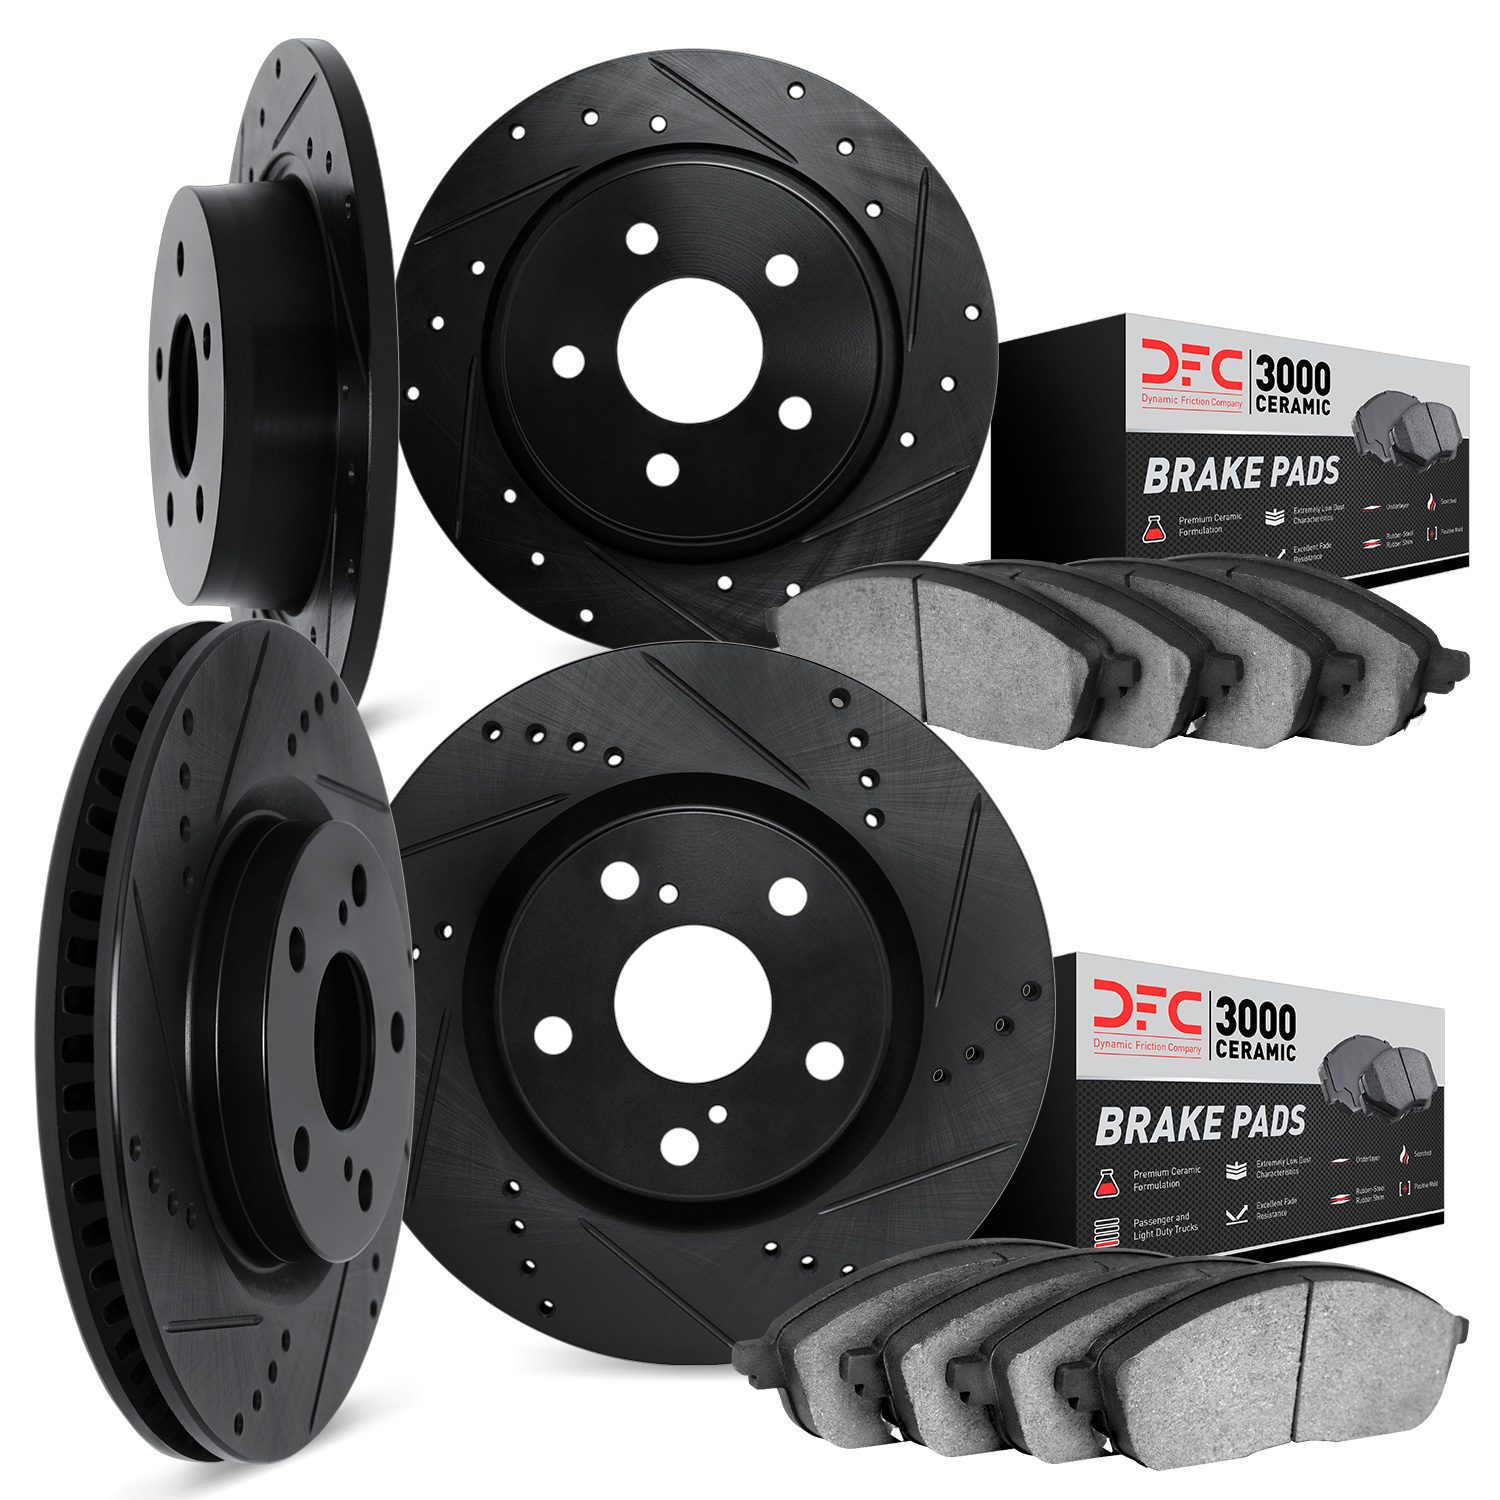 8304-59052 Drilled/Slotted Brake Rotors with 3000-Series Ceramic Brake Pads Kit [Black], 2011-2015 Acura/Honda, Position: Front